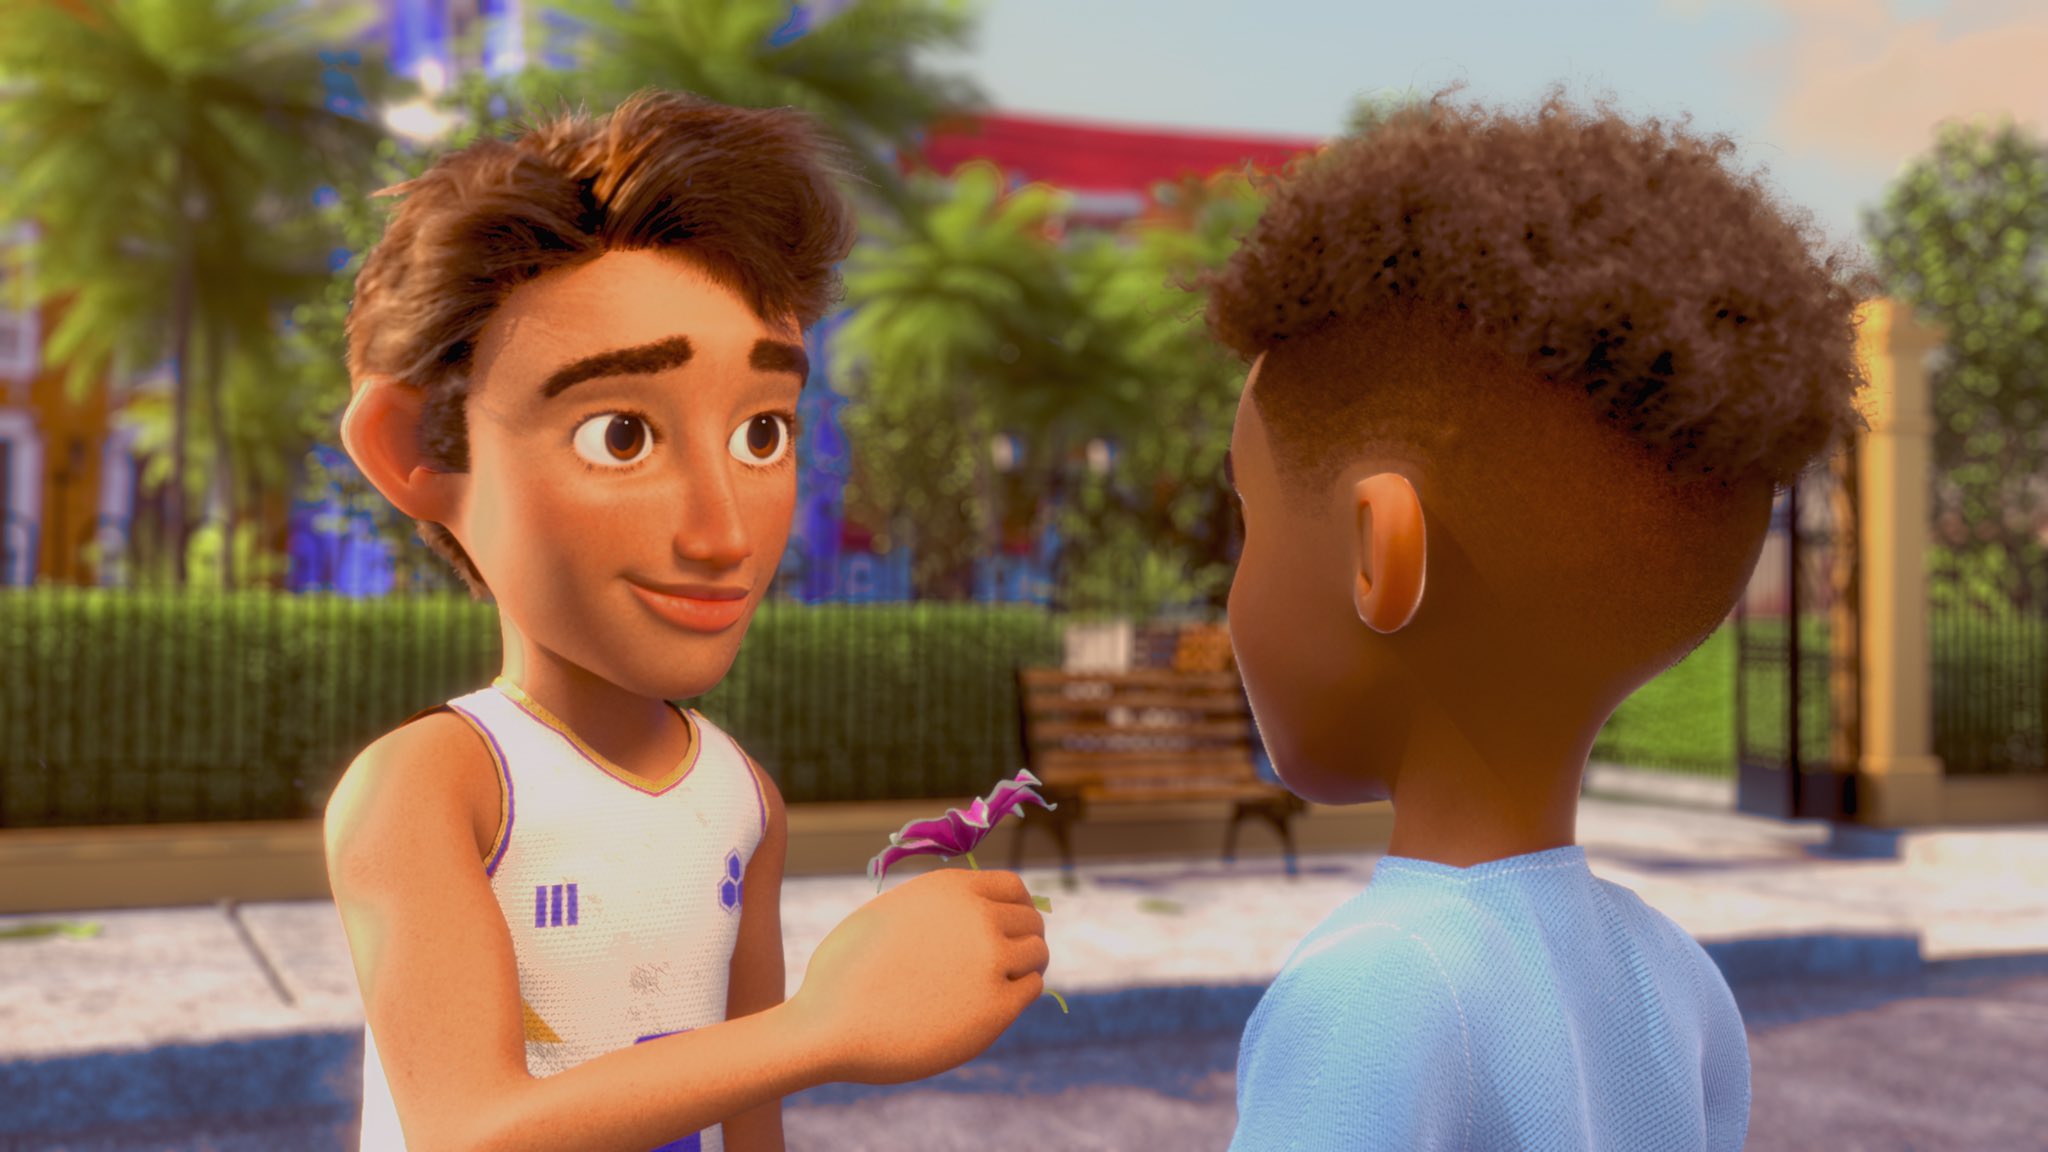 WATCH Cariño, an animated gay short film - The Rustin Times